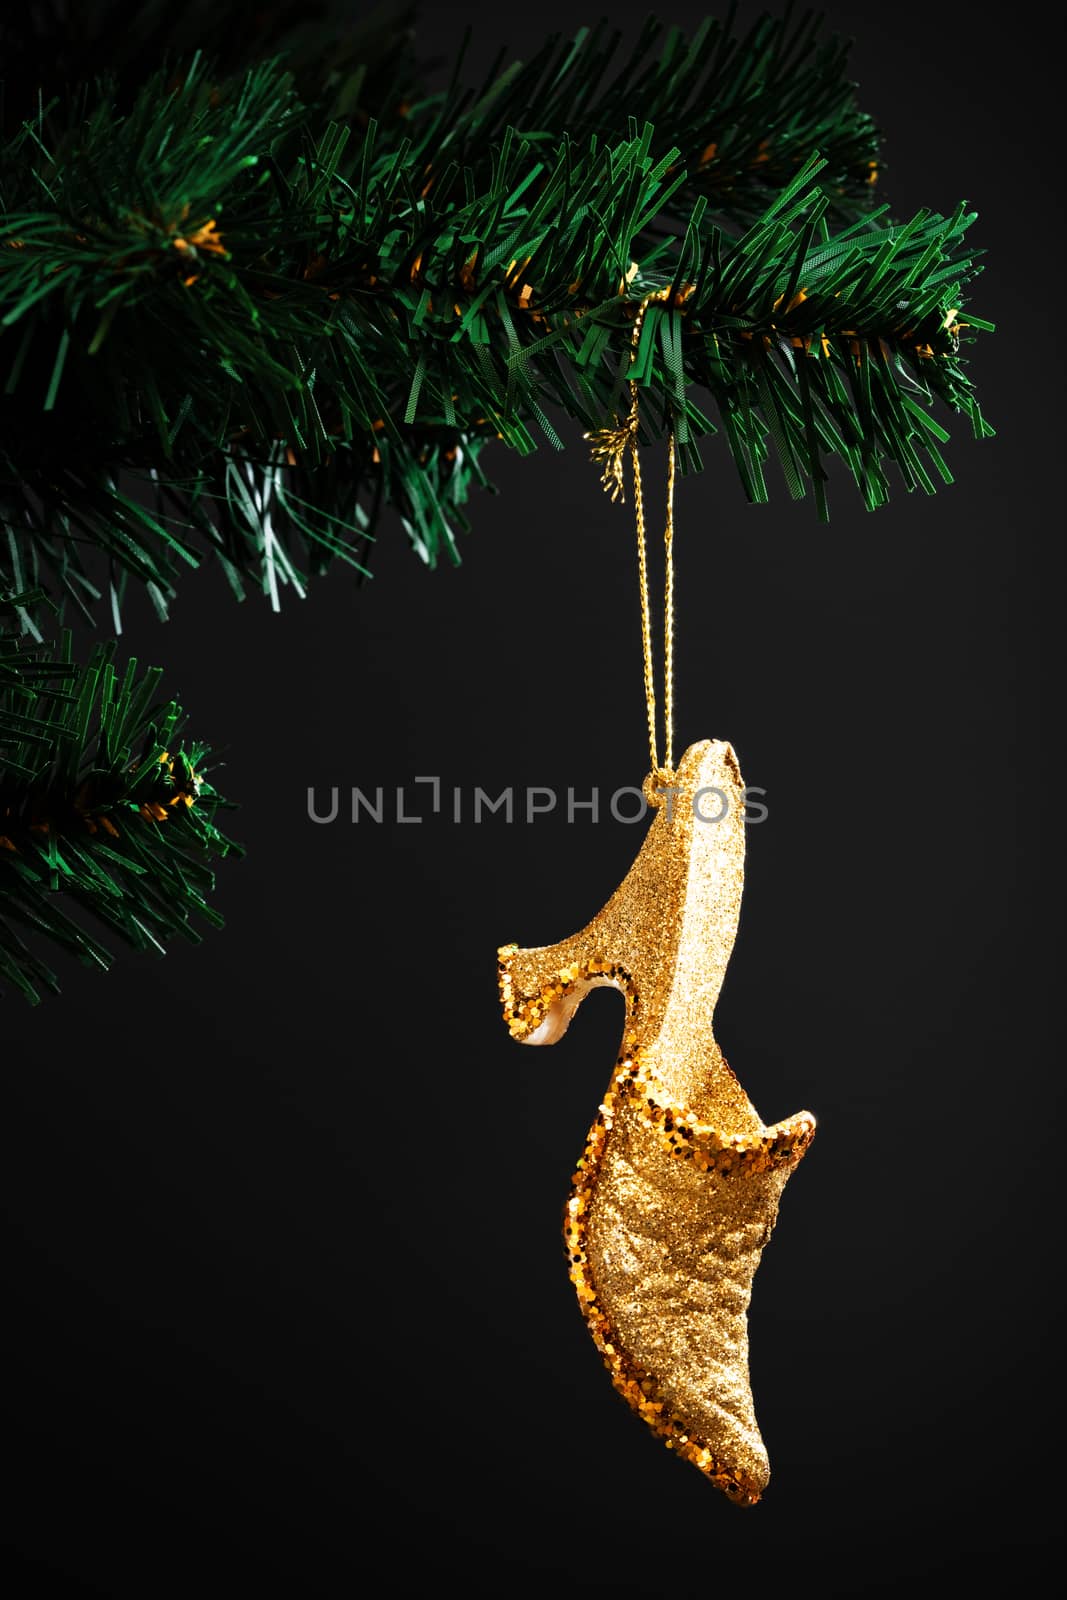 gold shoe on the artificial Christmas tree